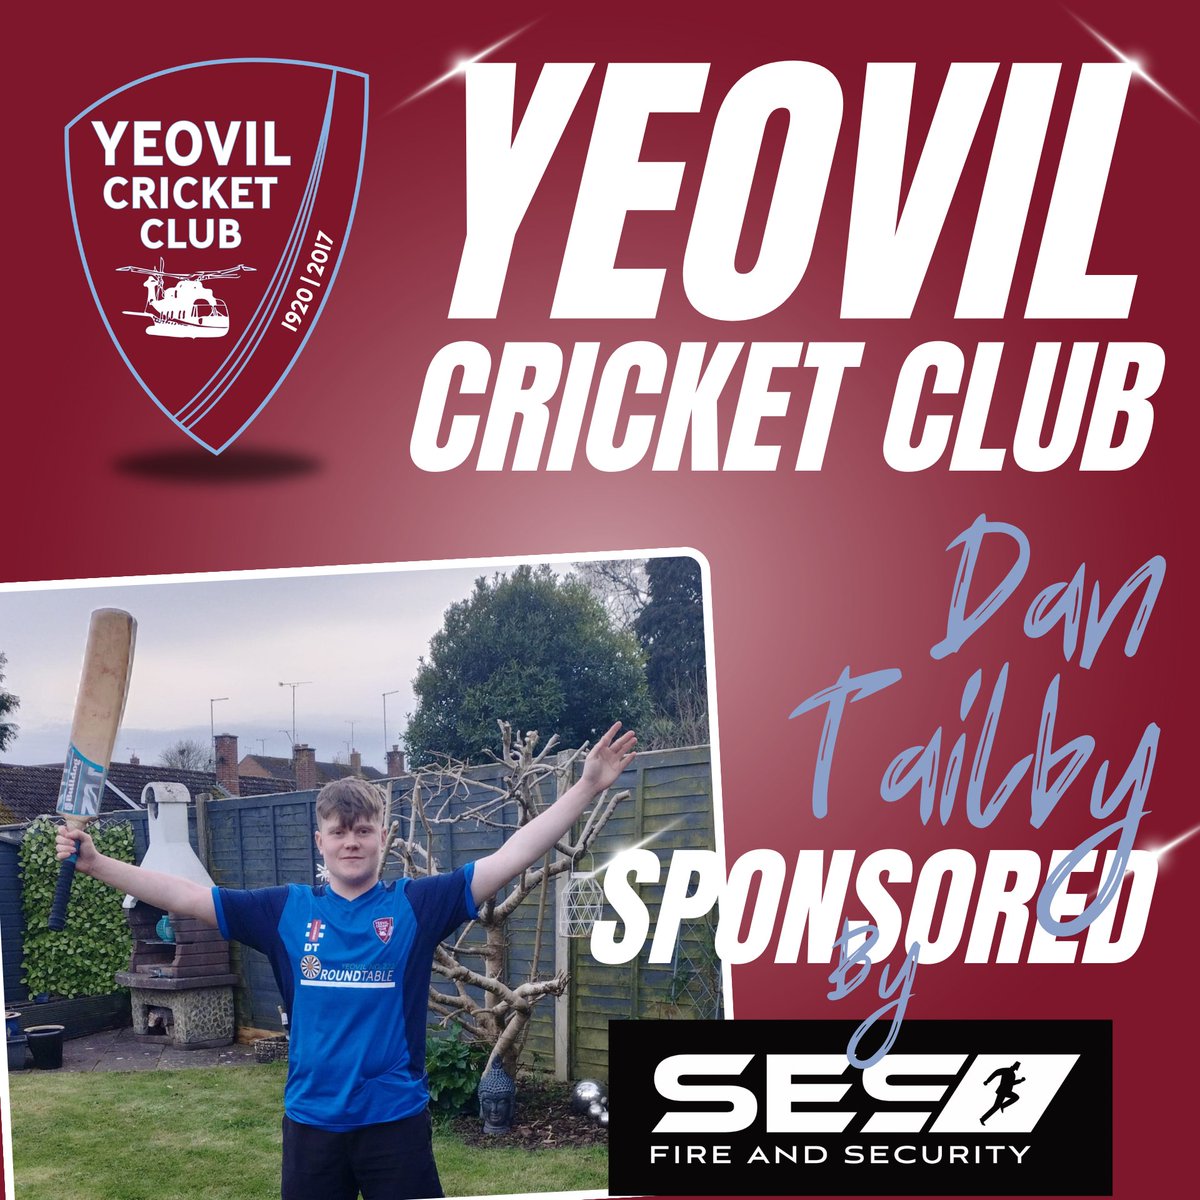 📝 Player Sponsorship 📝 A big thank you to SES Fire and Security for sponsoring Dan Tailby for the upcoming season 🏏 #YCC